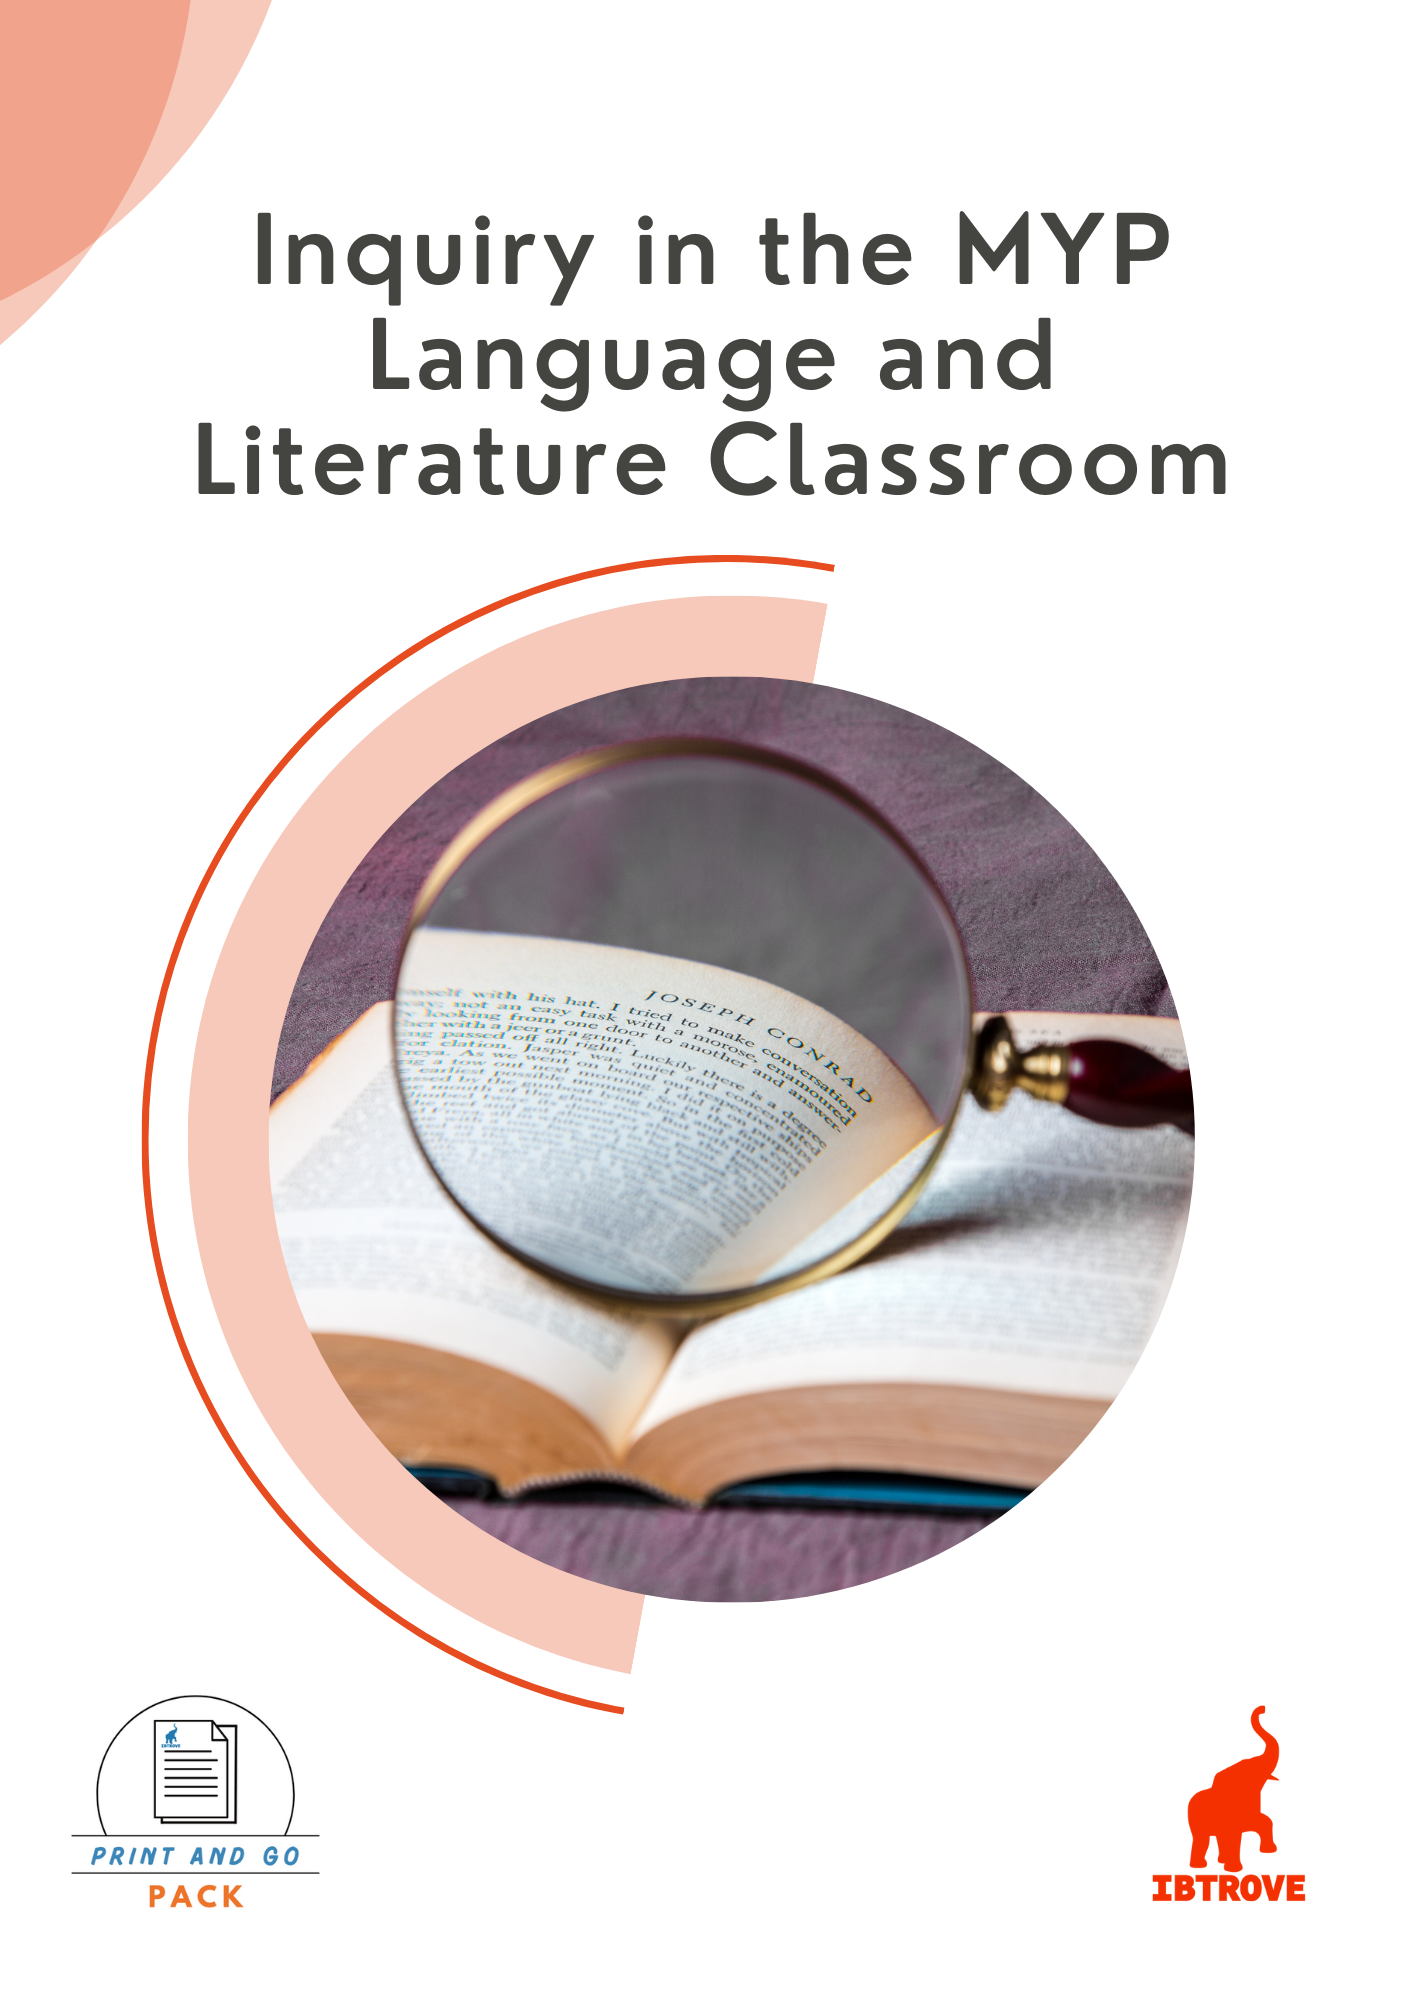 Inquiry in the MYP Language and Literature Classroom (Print and Go Pack)